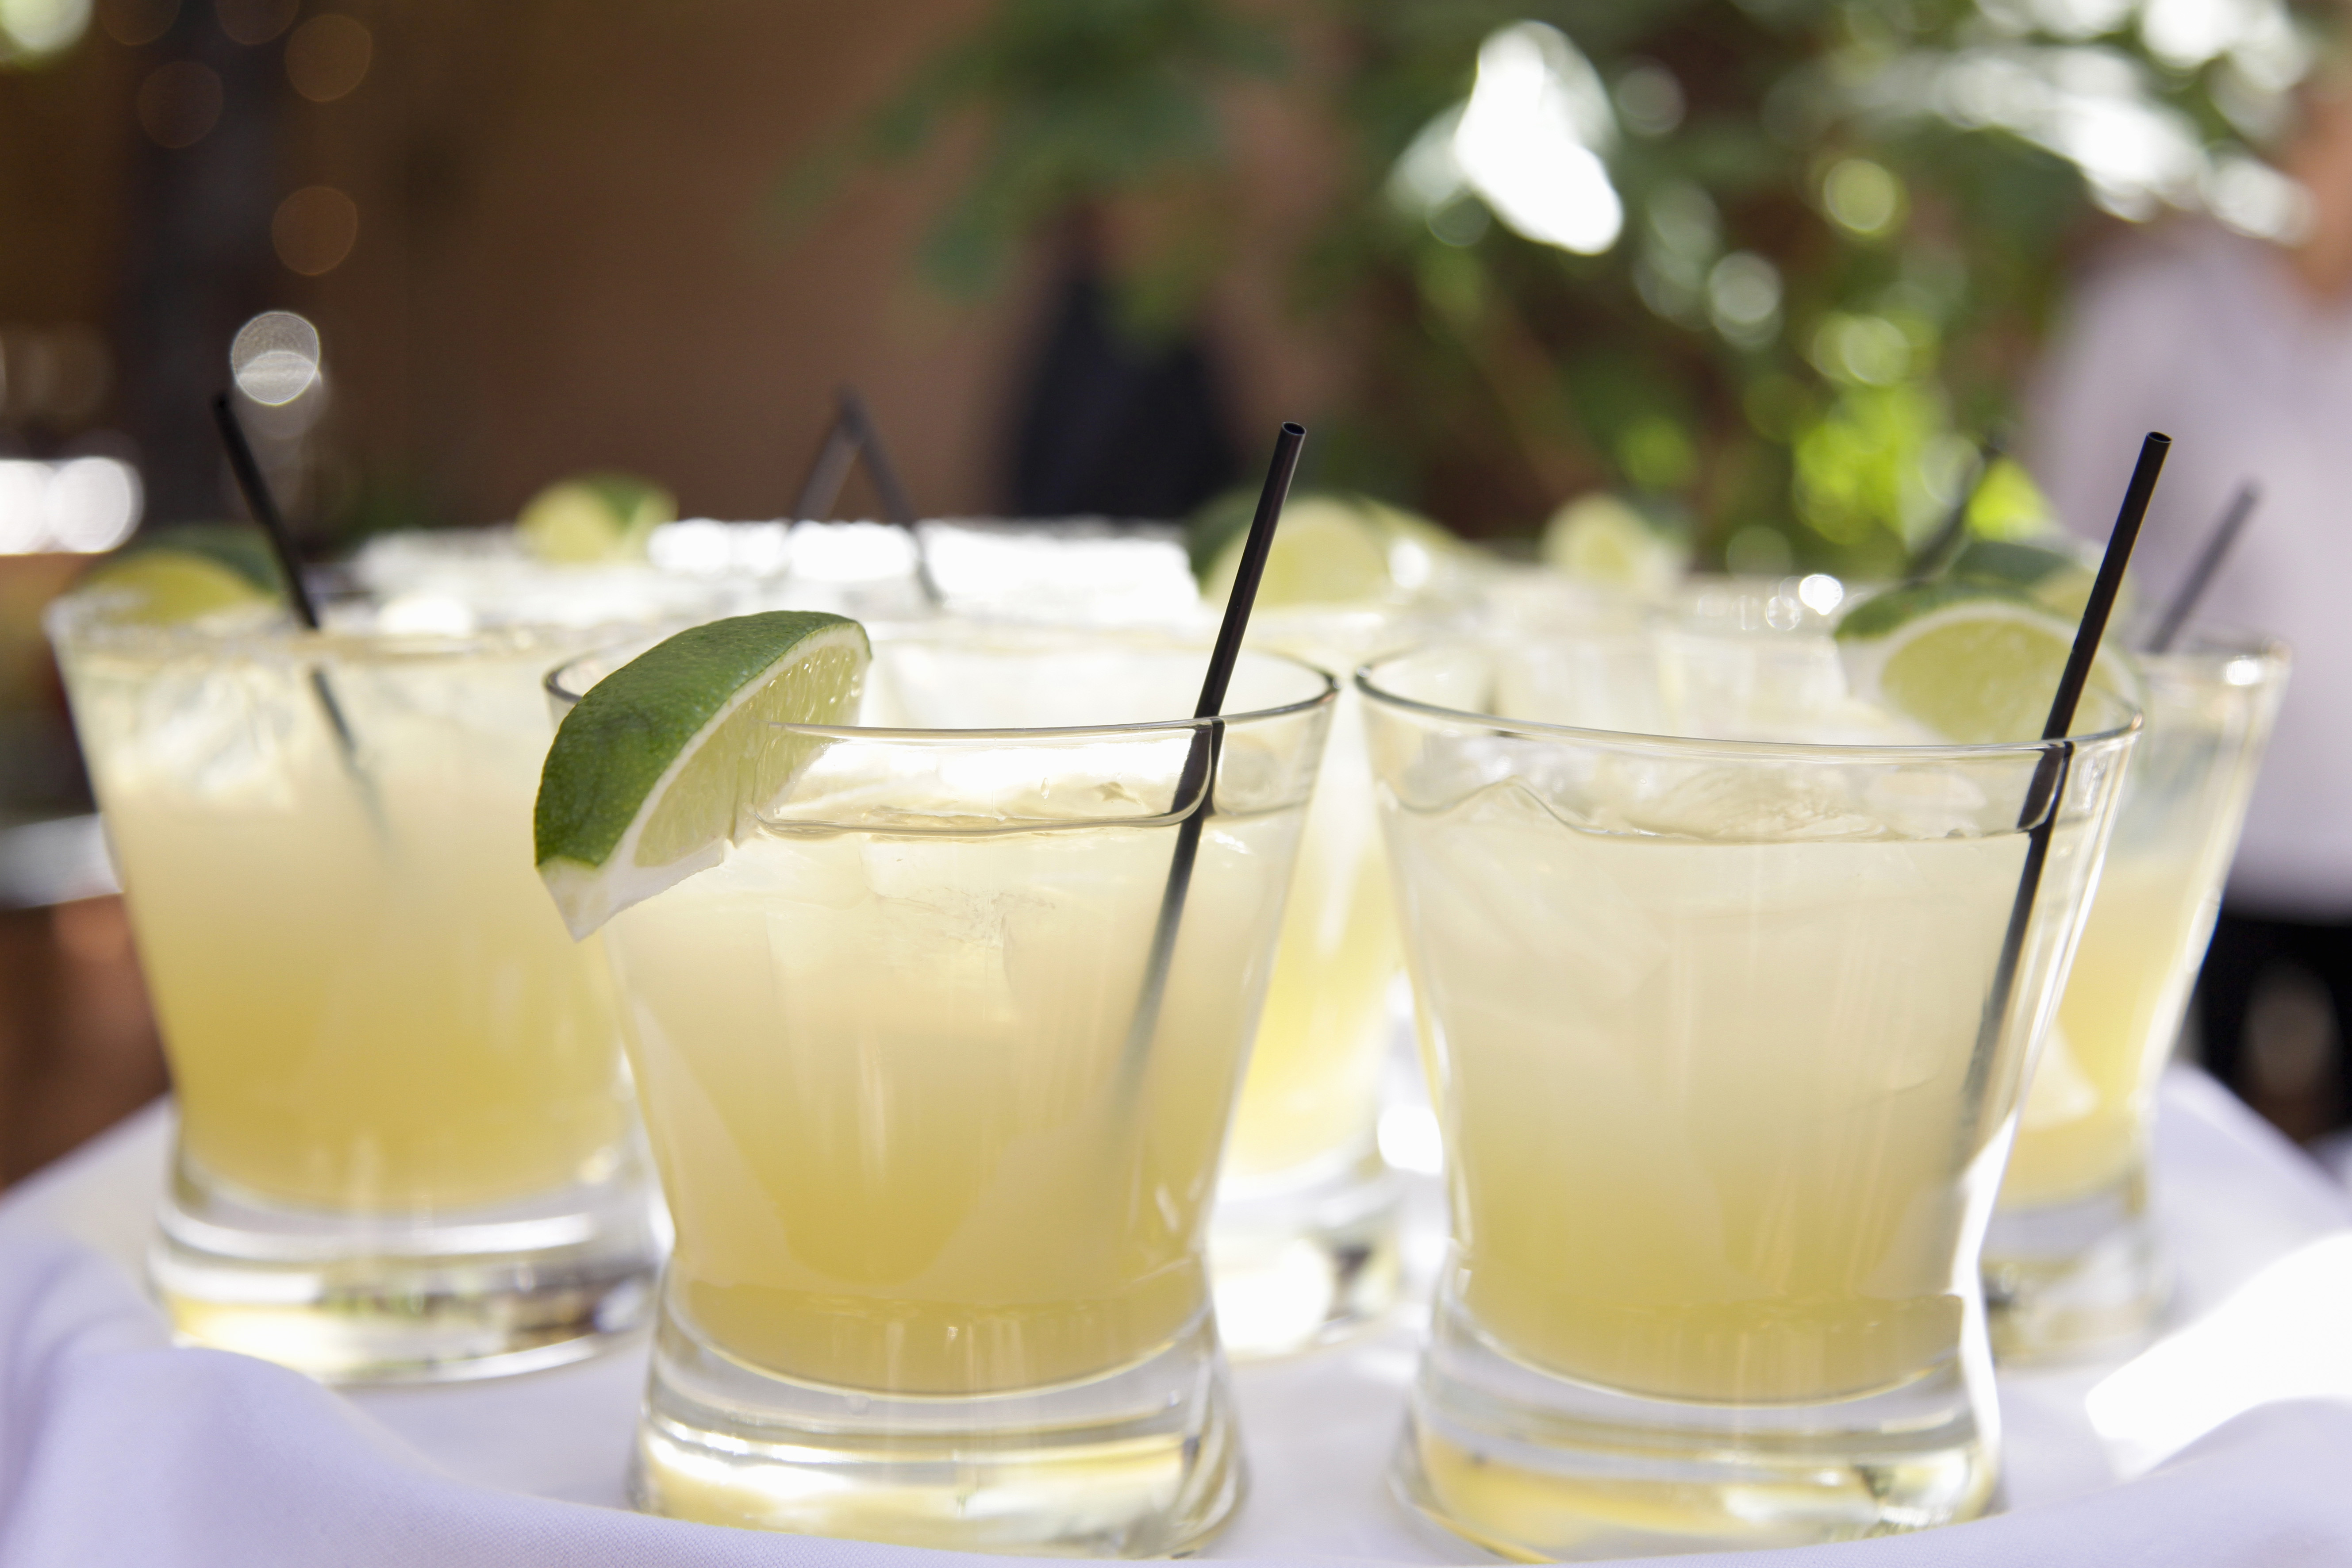 Applebees Is Offering 1 Margaritas All Month. How to Get It Money